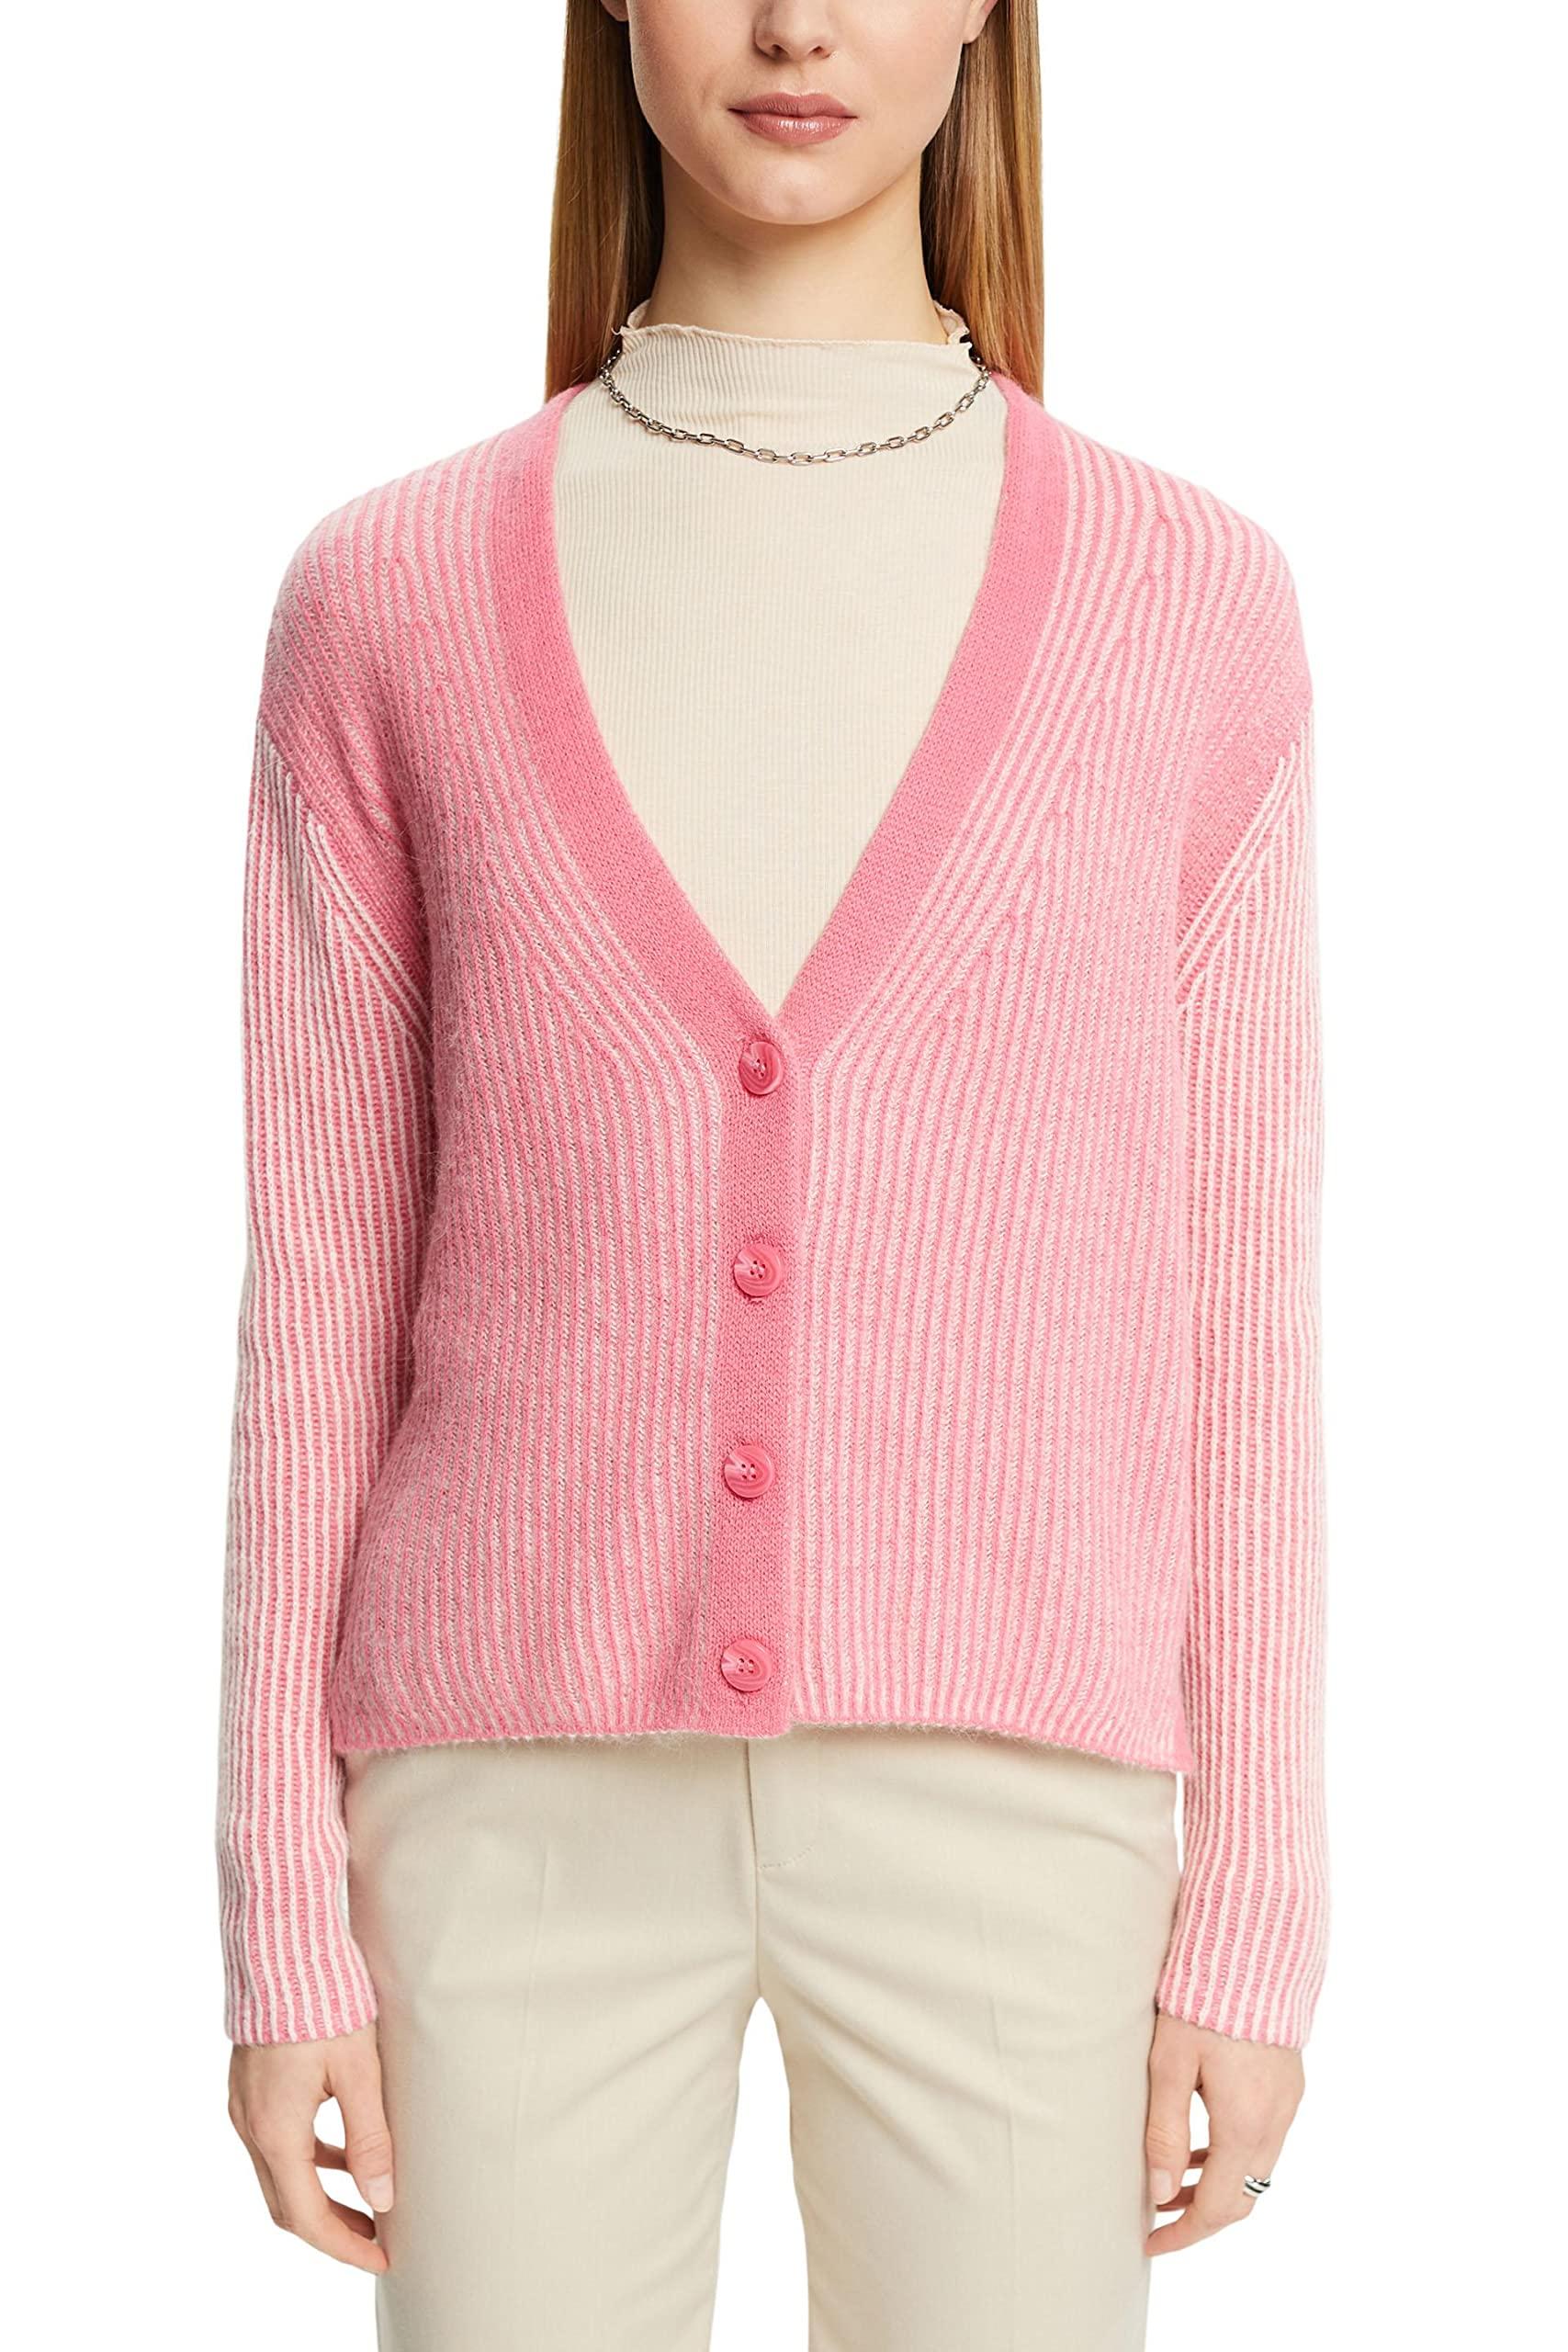 Esprit Collection 122eo1i316 Cardigan Sweater in Pink | Lyst UK